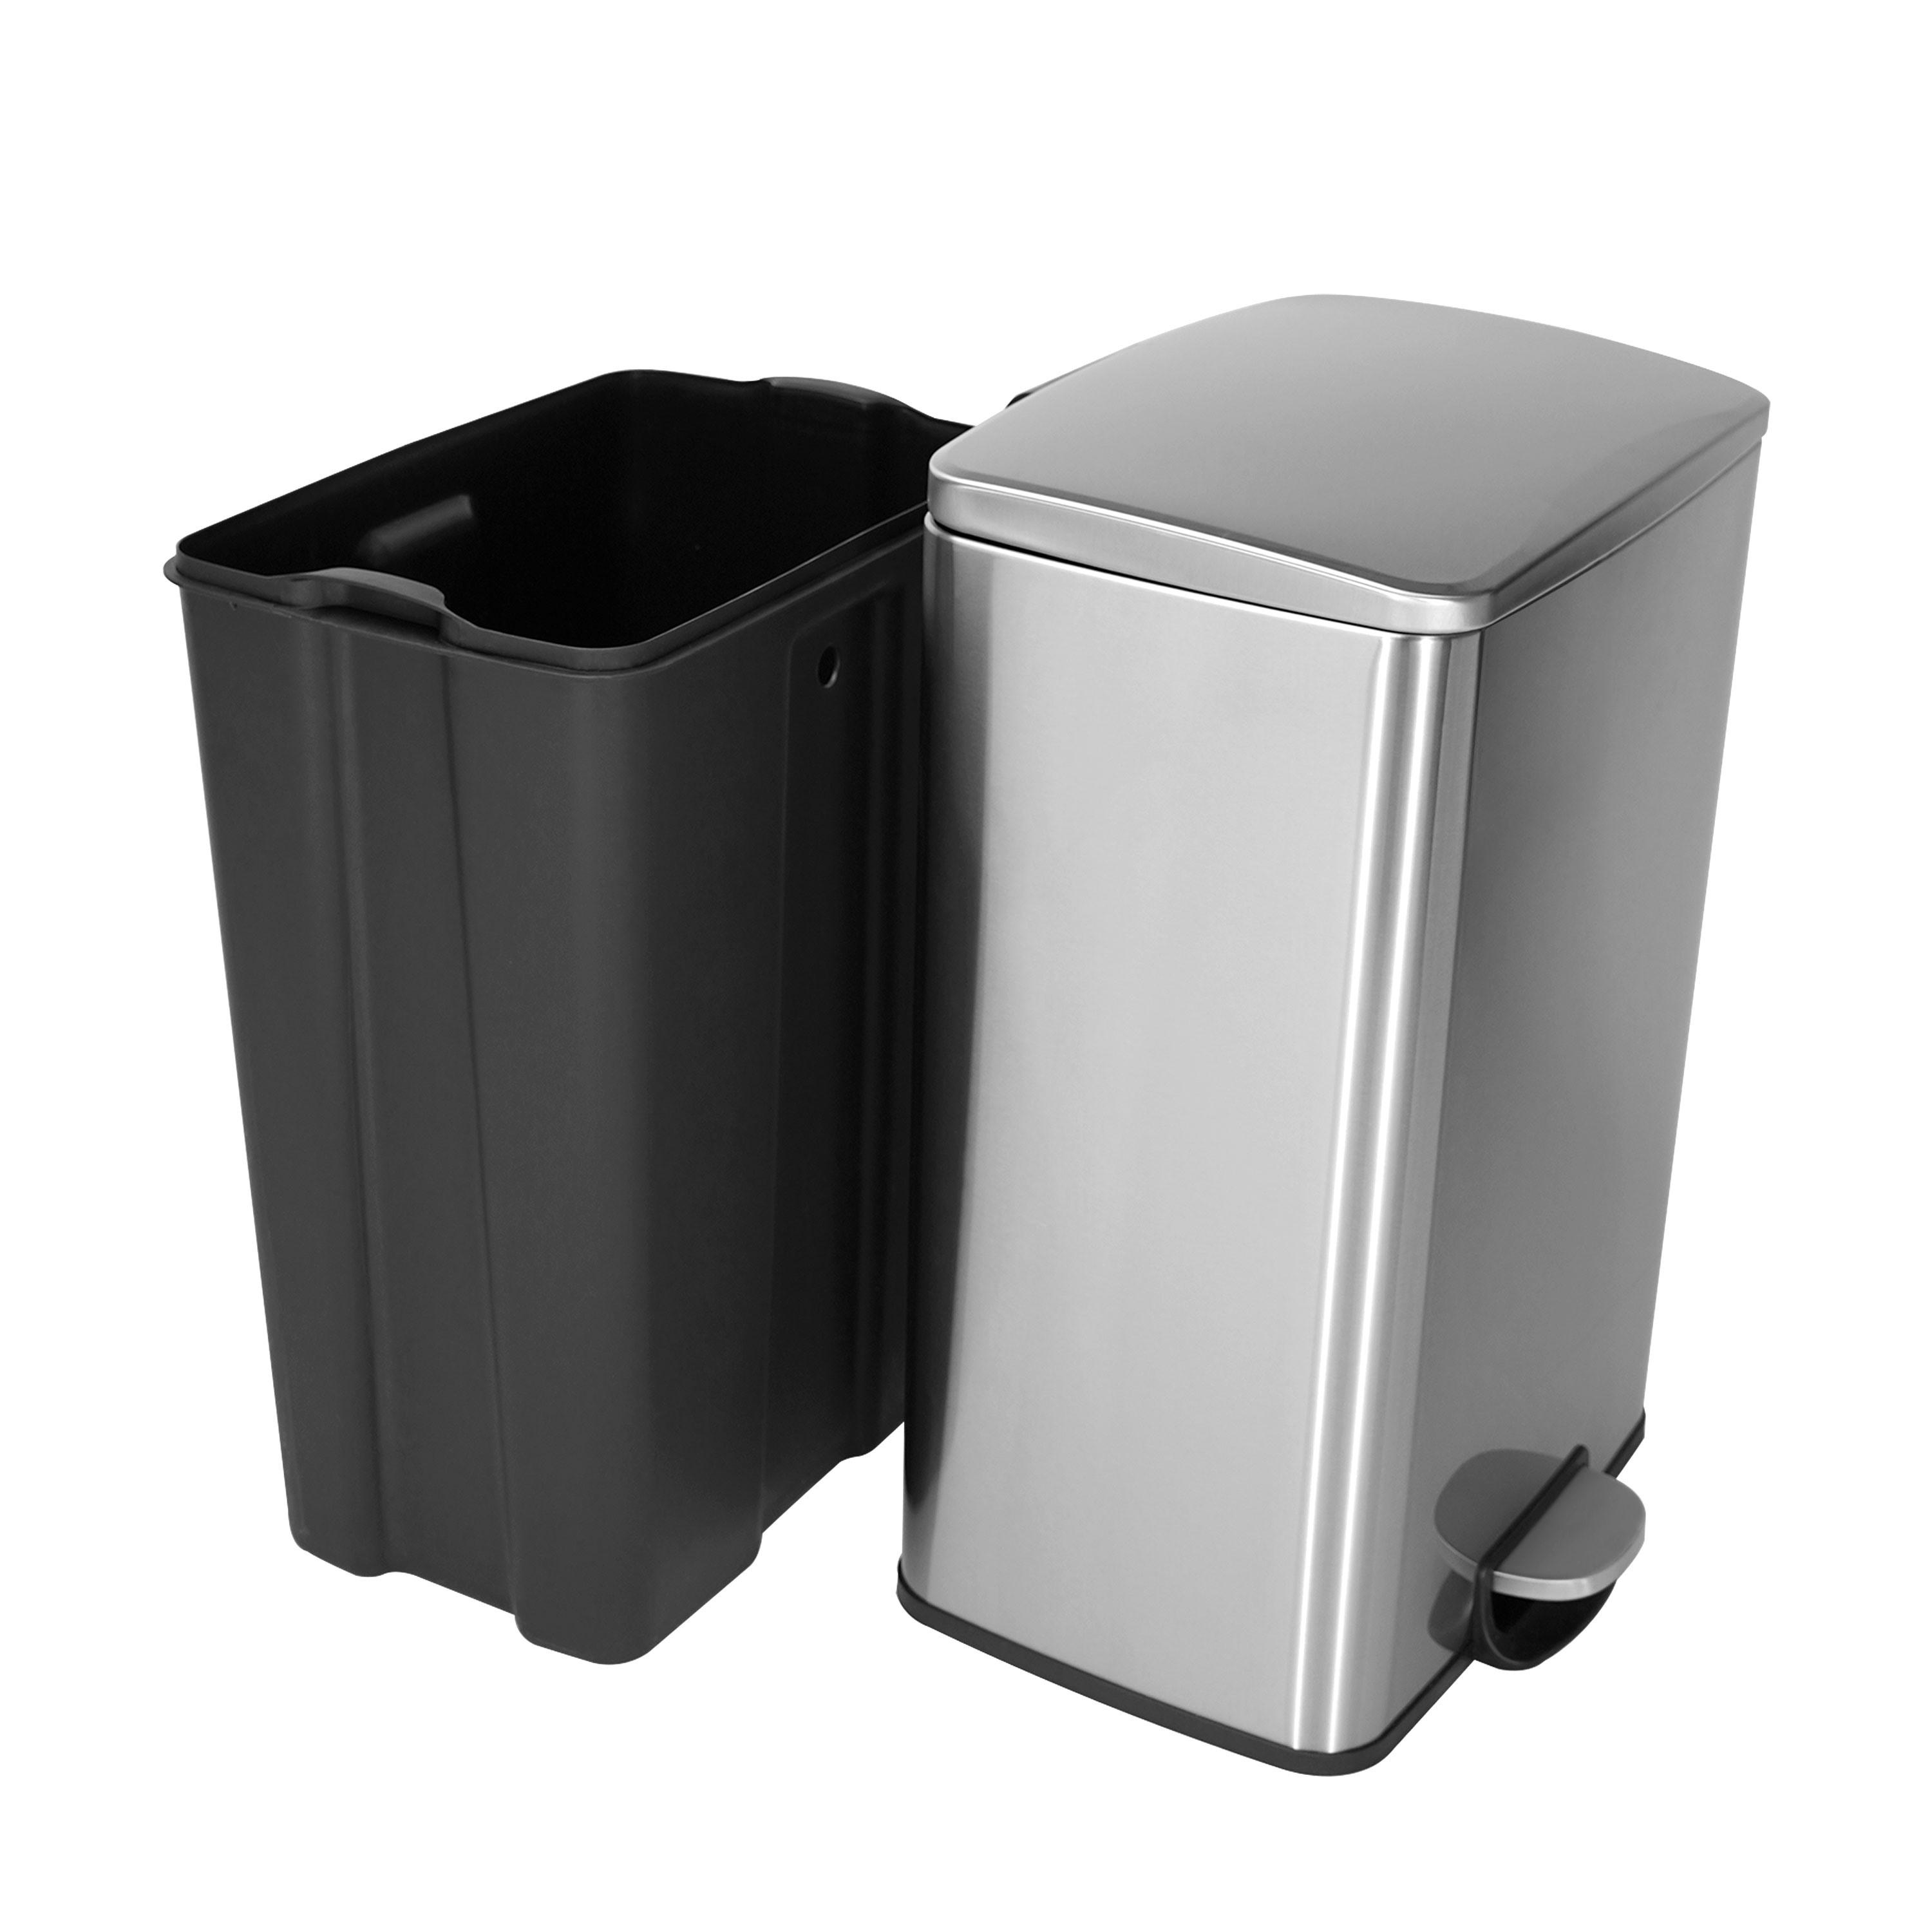 iTouchless SoftStep 13.2 Gallon Step Trash Can with Odor Filter System,  Stainless Steel 50 Liter Pedal Garbage Bin for Kitchen, Home, Office,  Silent